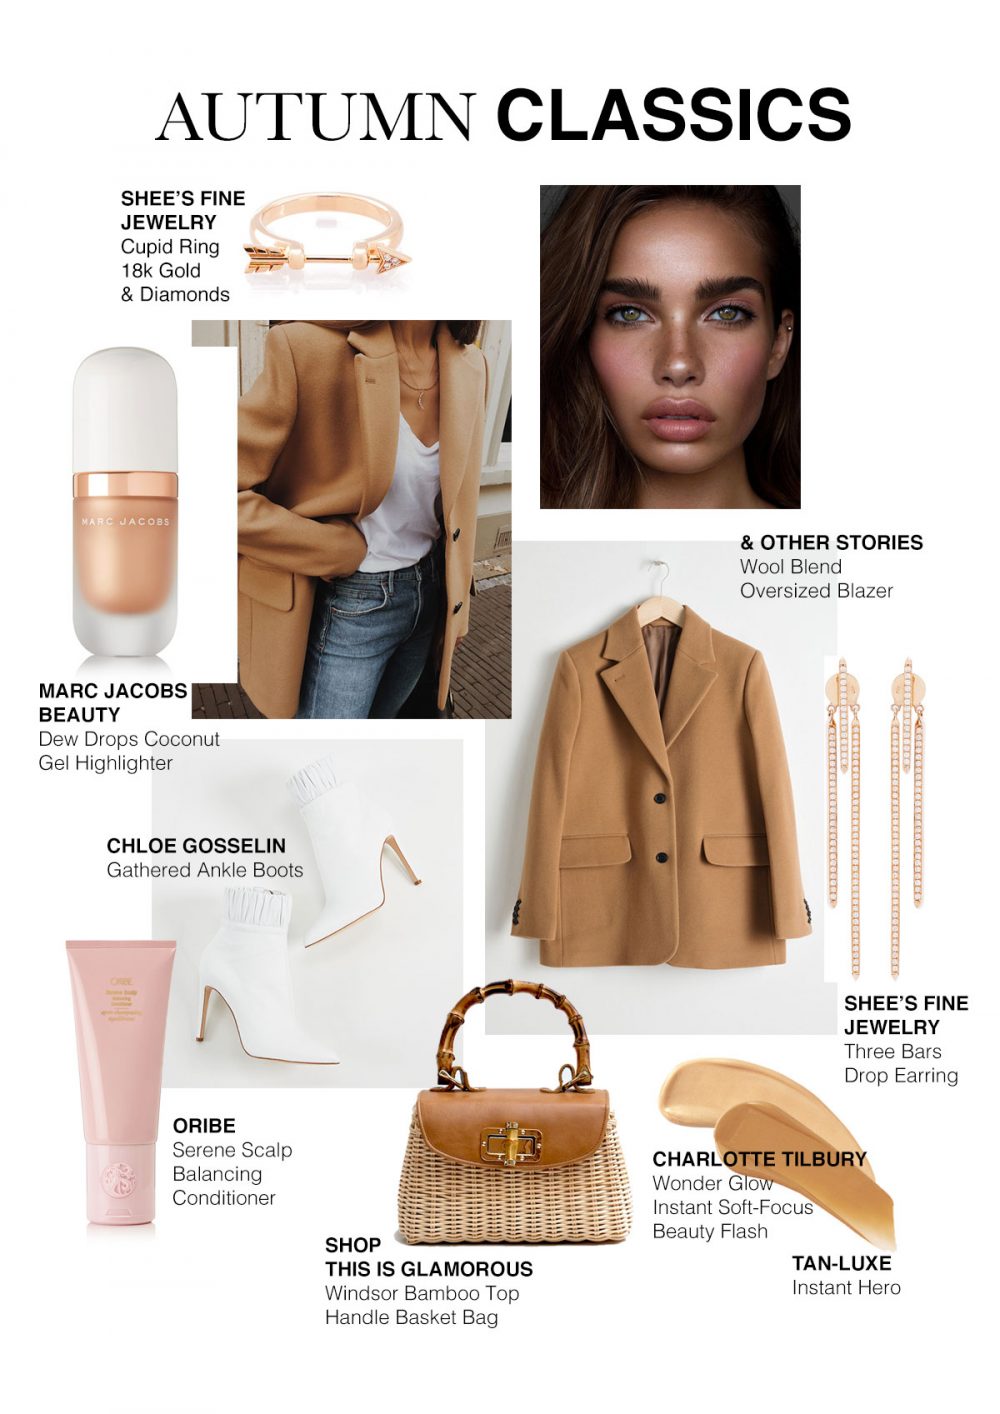 The Edit | Autumn Classics in Shades of White & Camel